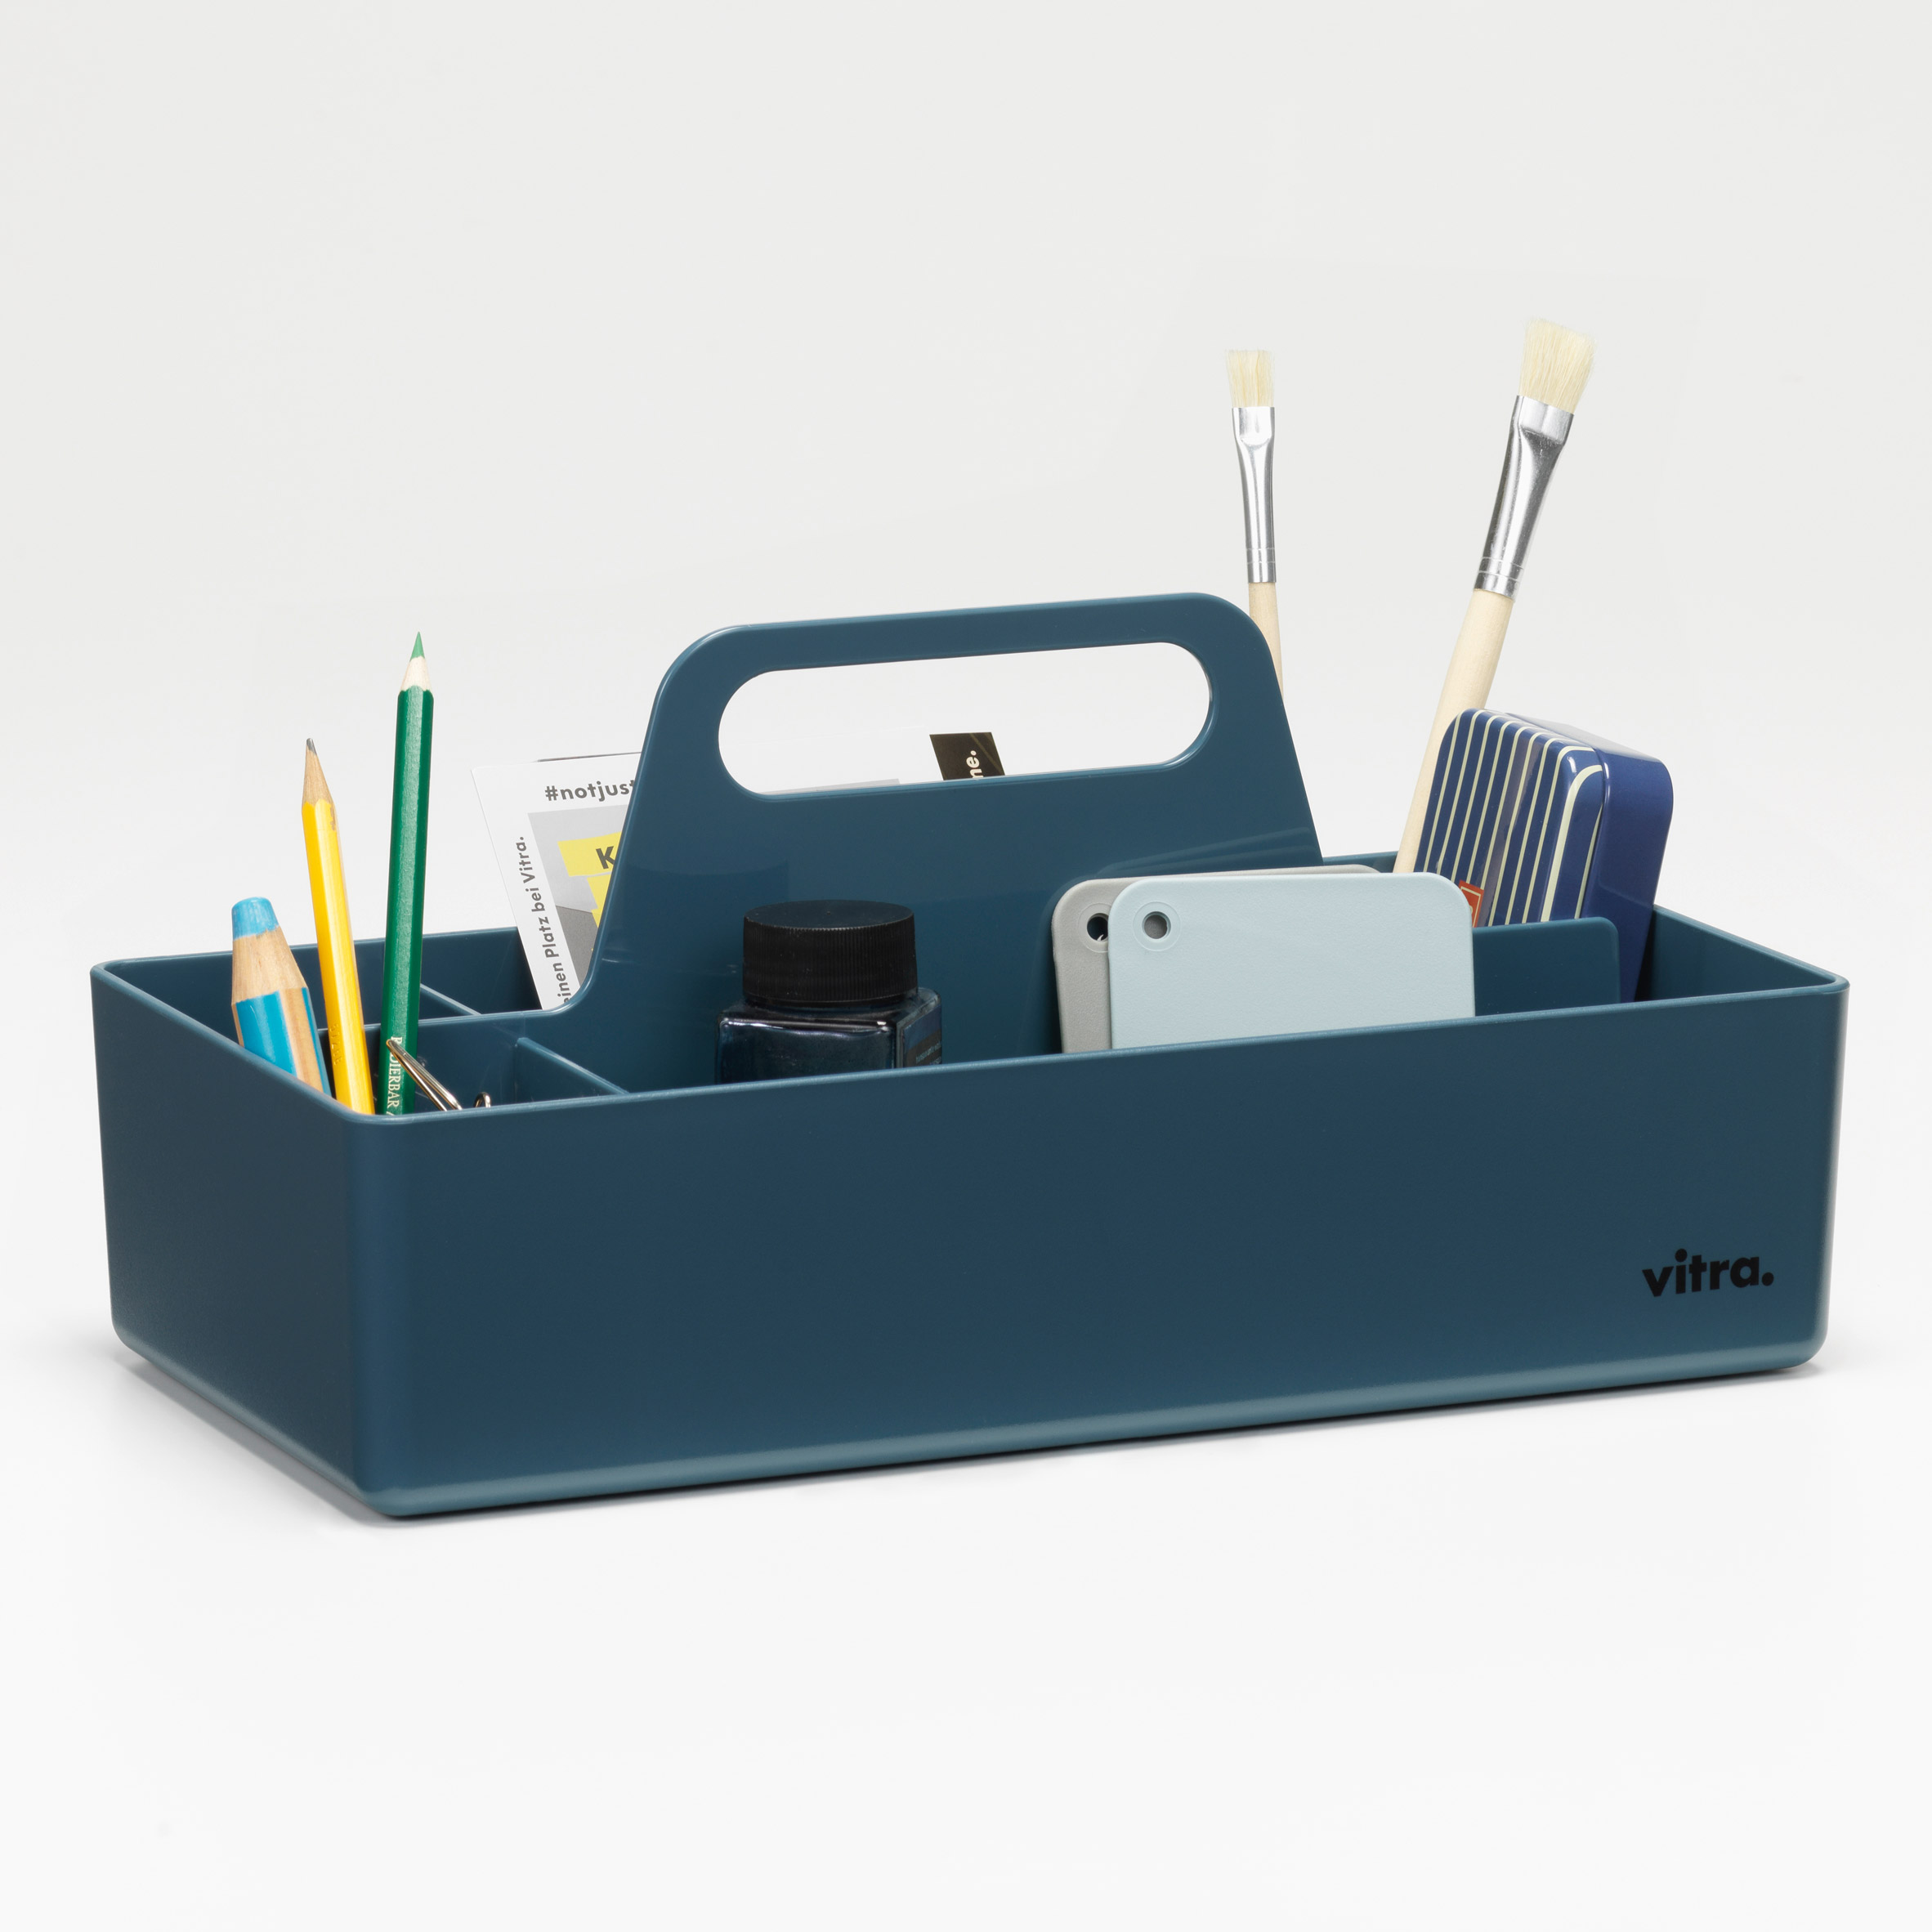 Christmas 2018 gifts for architects and designers: Toolbox by Vitra